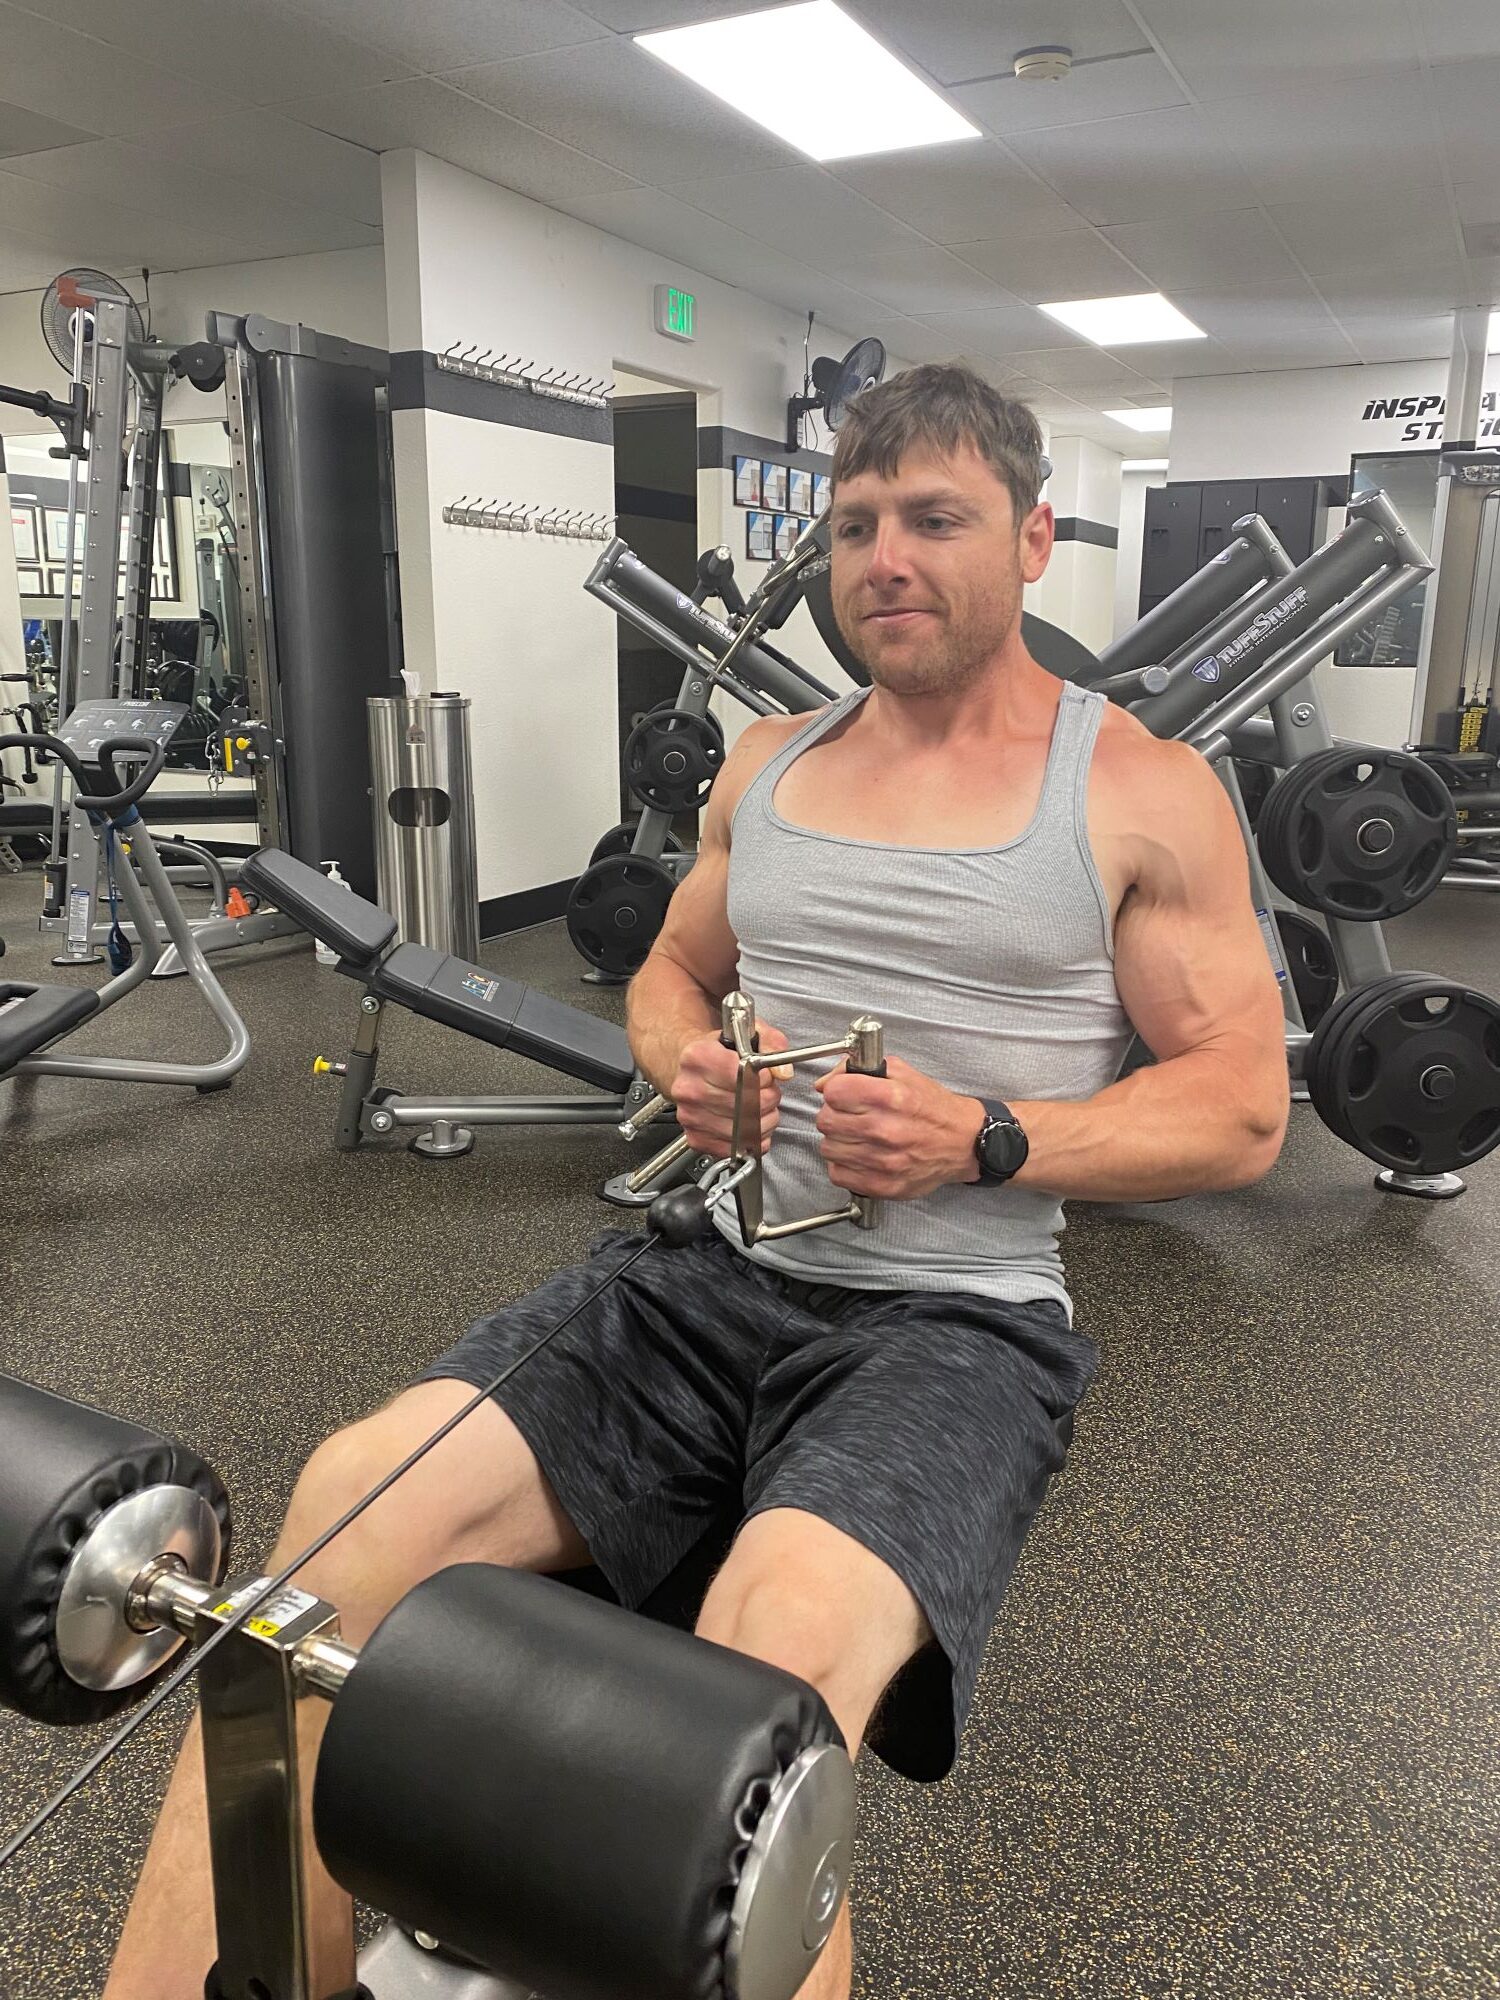 https://adventurefitness.club/wp-content/uploads/2021/07/exercise-at-gym-when-hot-outside-rotated.jpg